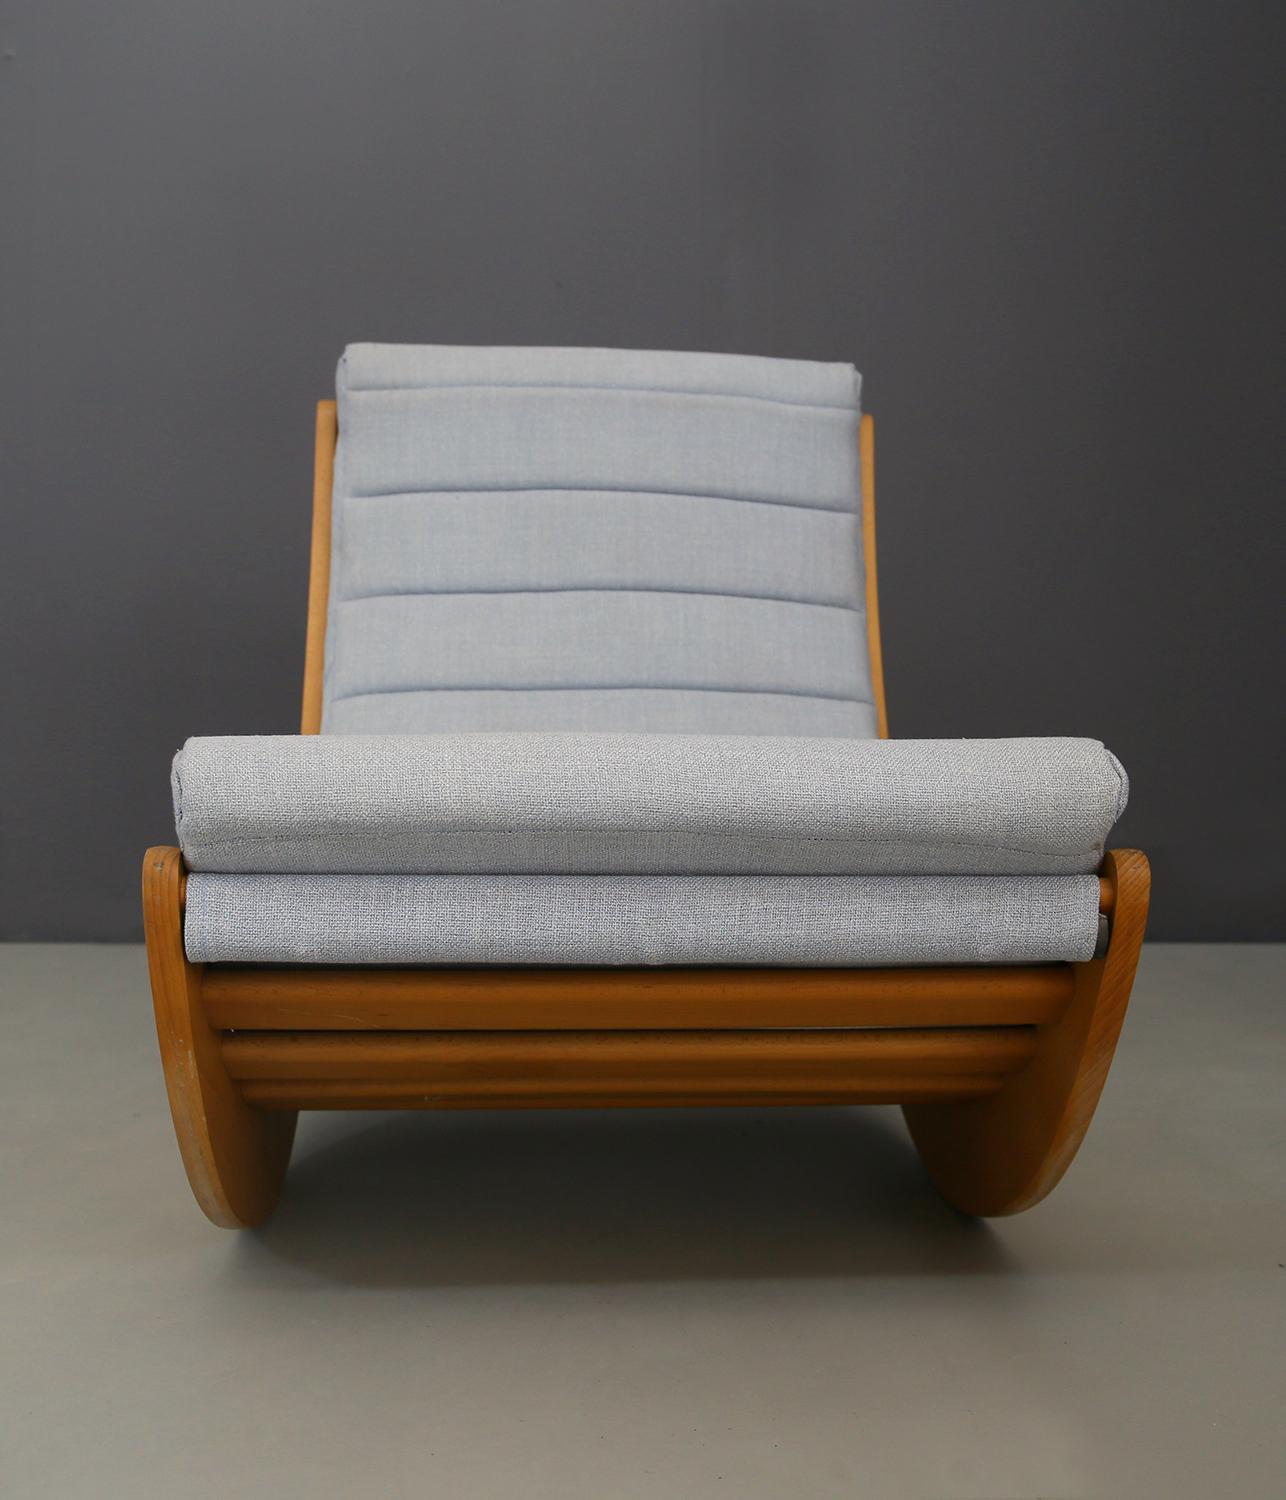 Rocking chair by Verner Panton for Rosenthal , 1974. The rocking chair has been restored. The wooden structure is slatted for greater comfort in the seat. Beechwood and linen cotton. Attractive rocking chair designed by Verner Panton, produced by